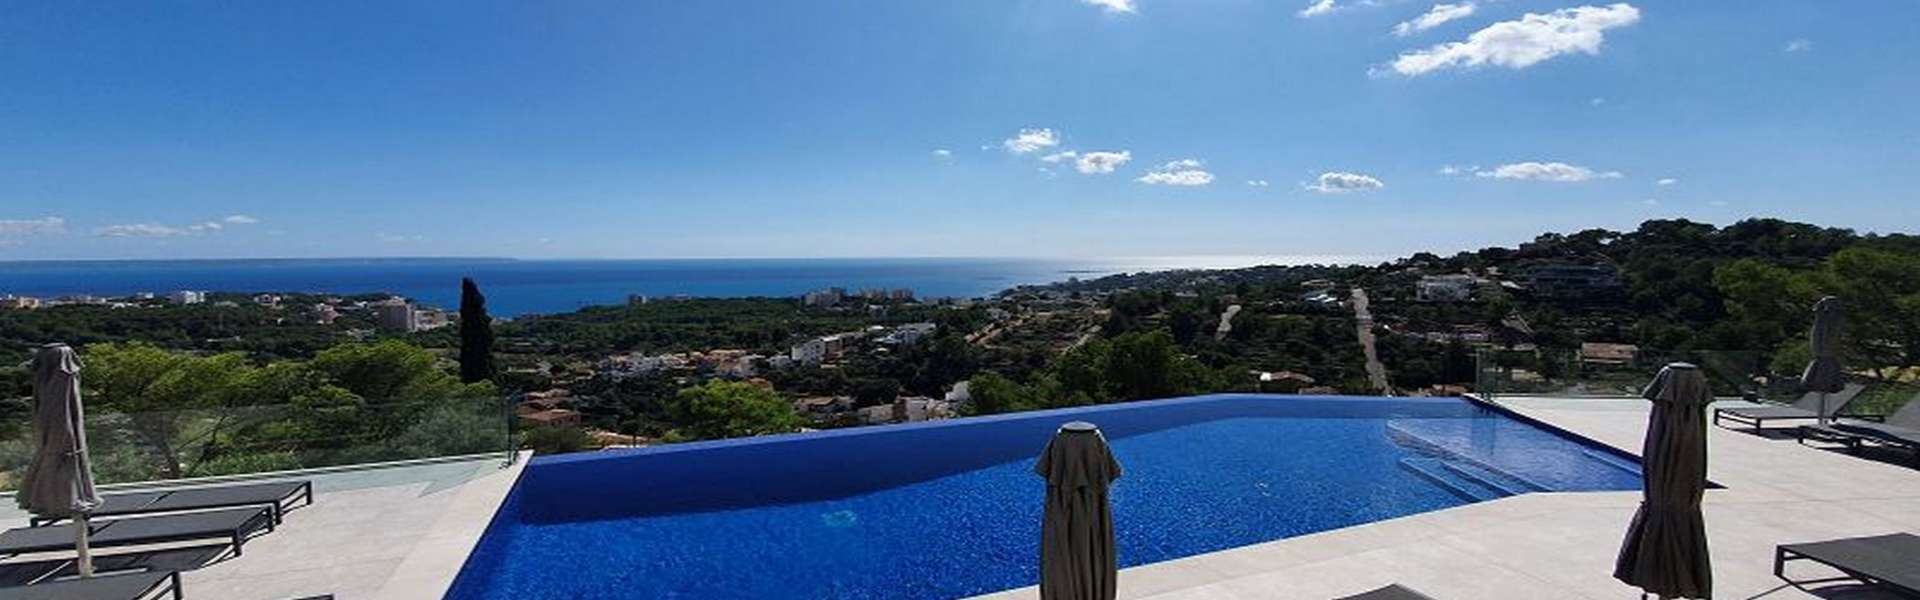 Palma/Génova - Apartments/Penthouse with sea view in exclusive location